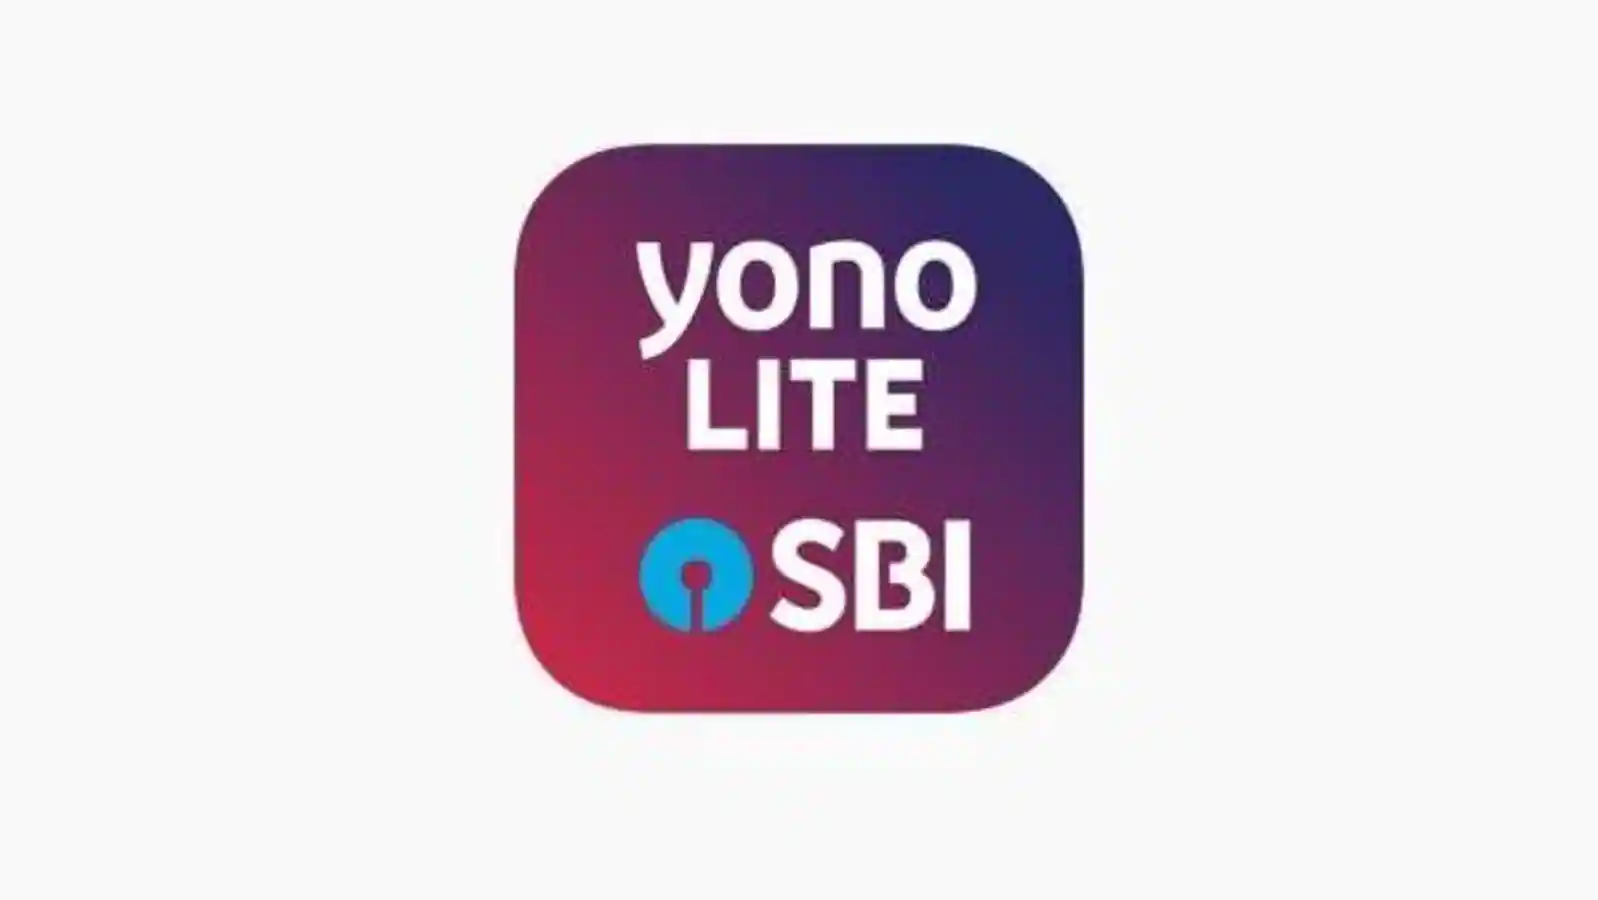 Yono lite sbi we are having technical issues please try again later Error